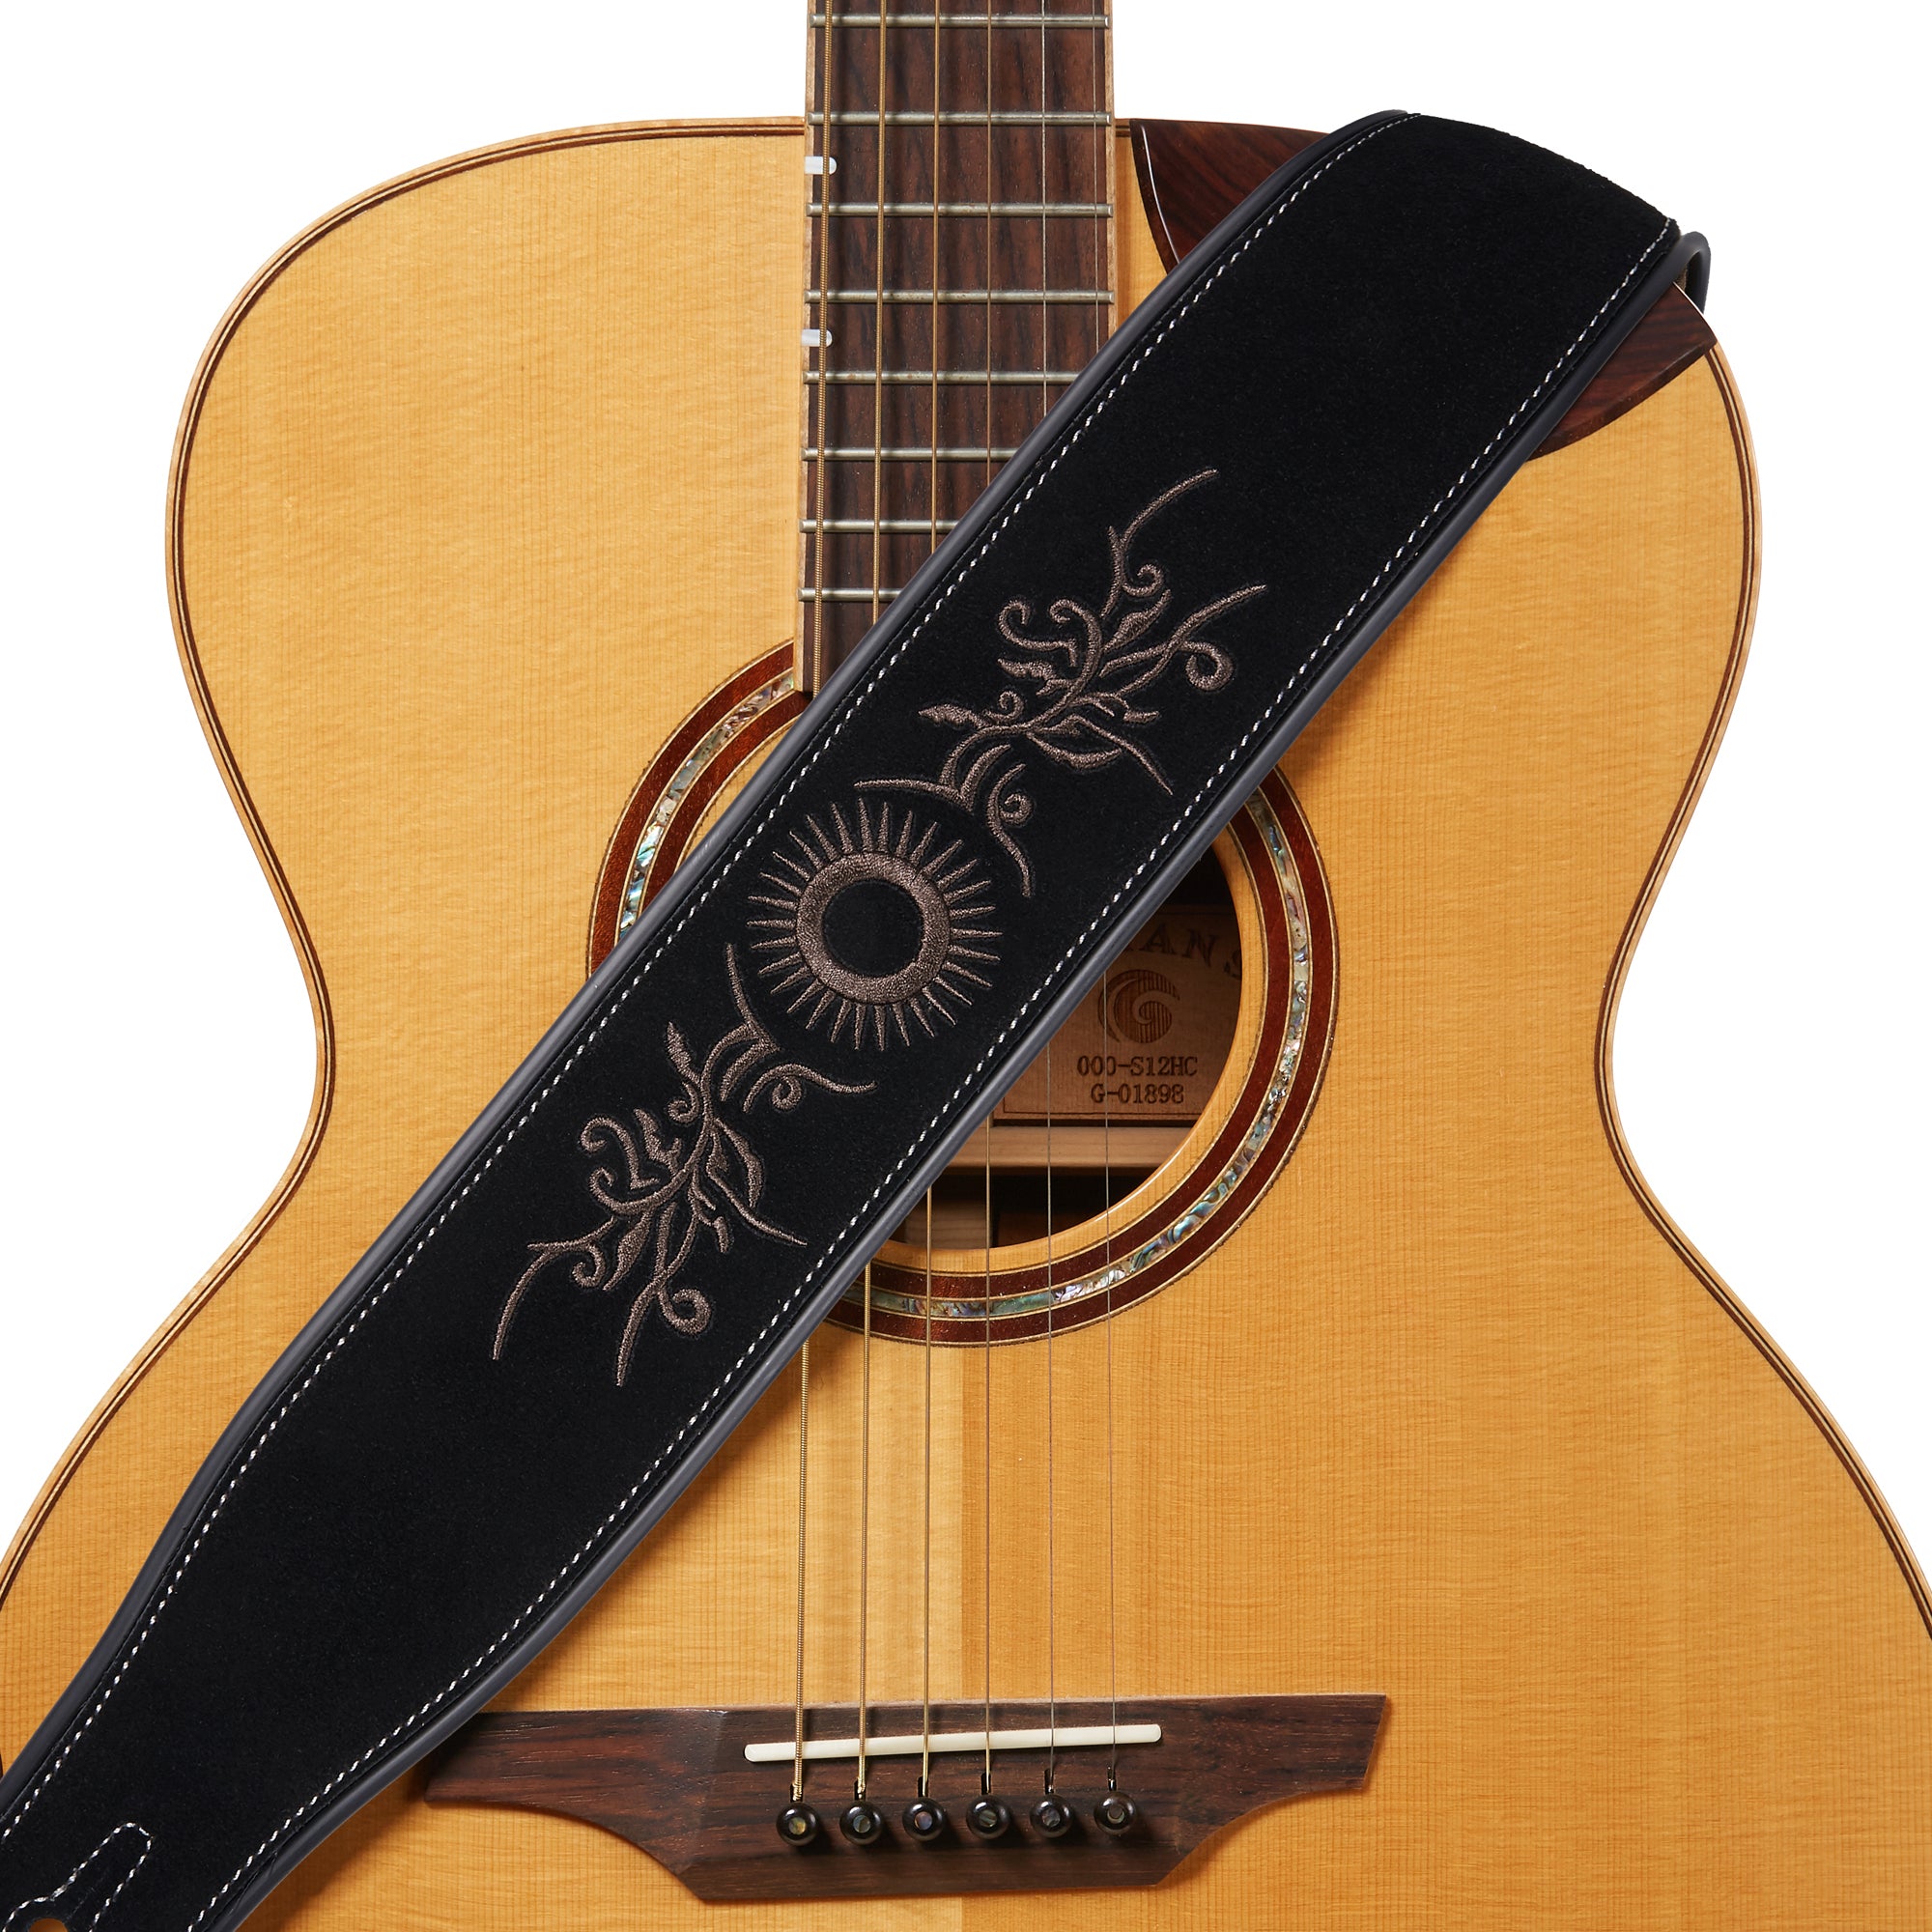 Guitar Straps Embroidery Bohemian For Bass Electric Acoustic Guitar  Adjustable